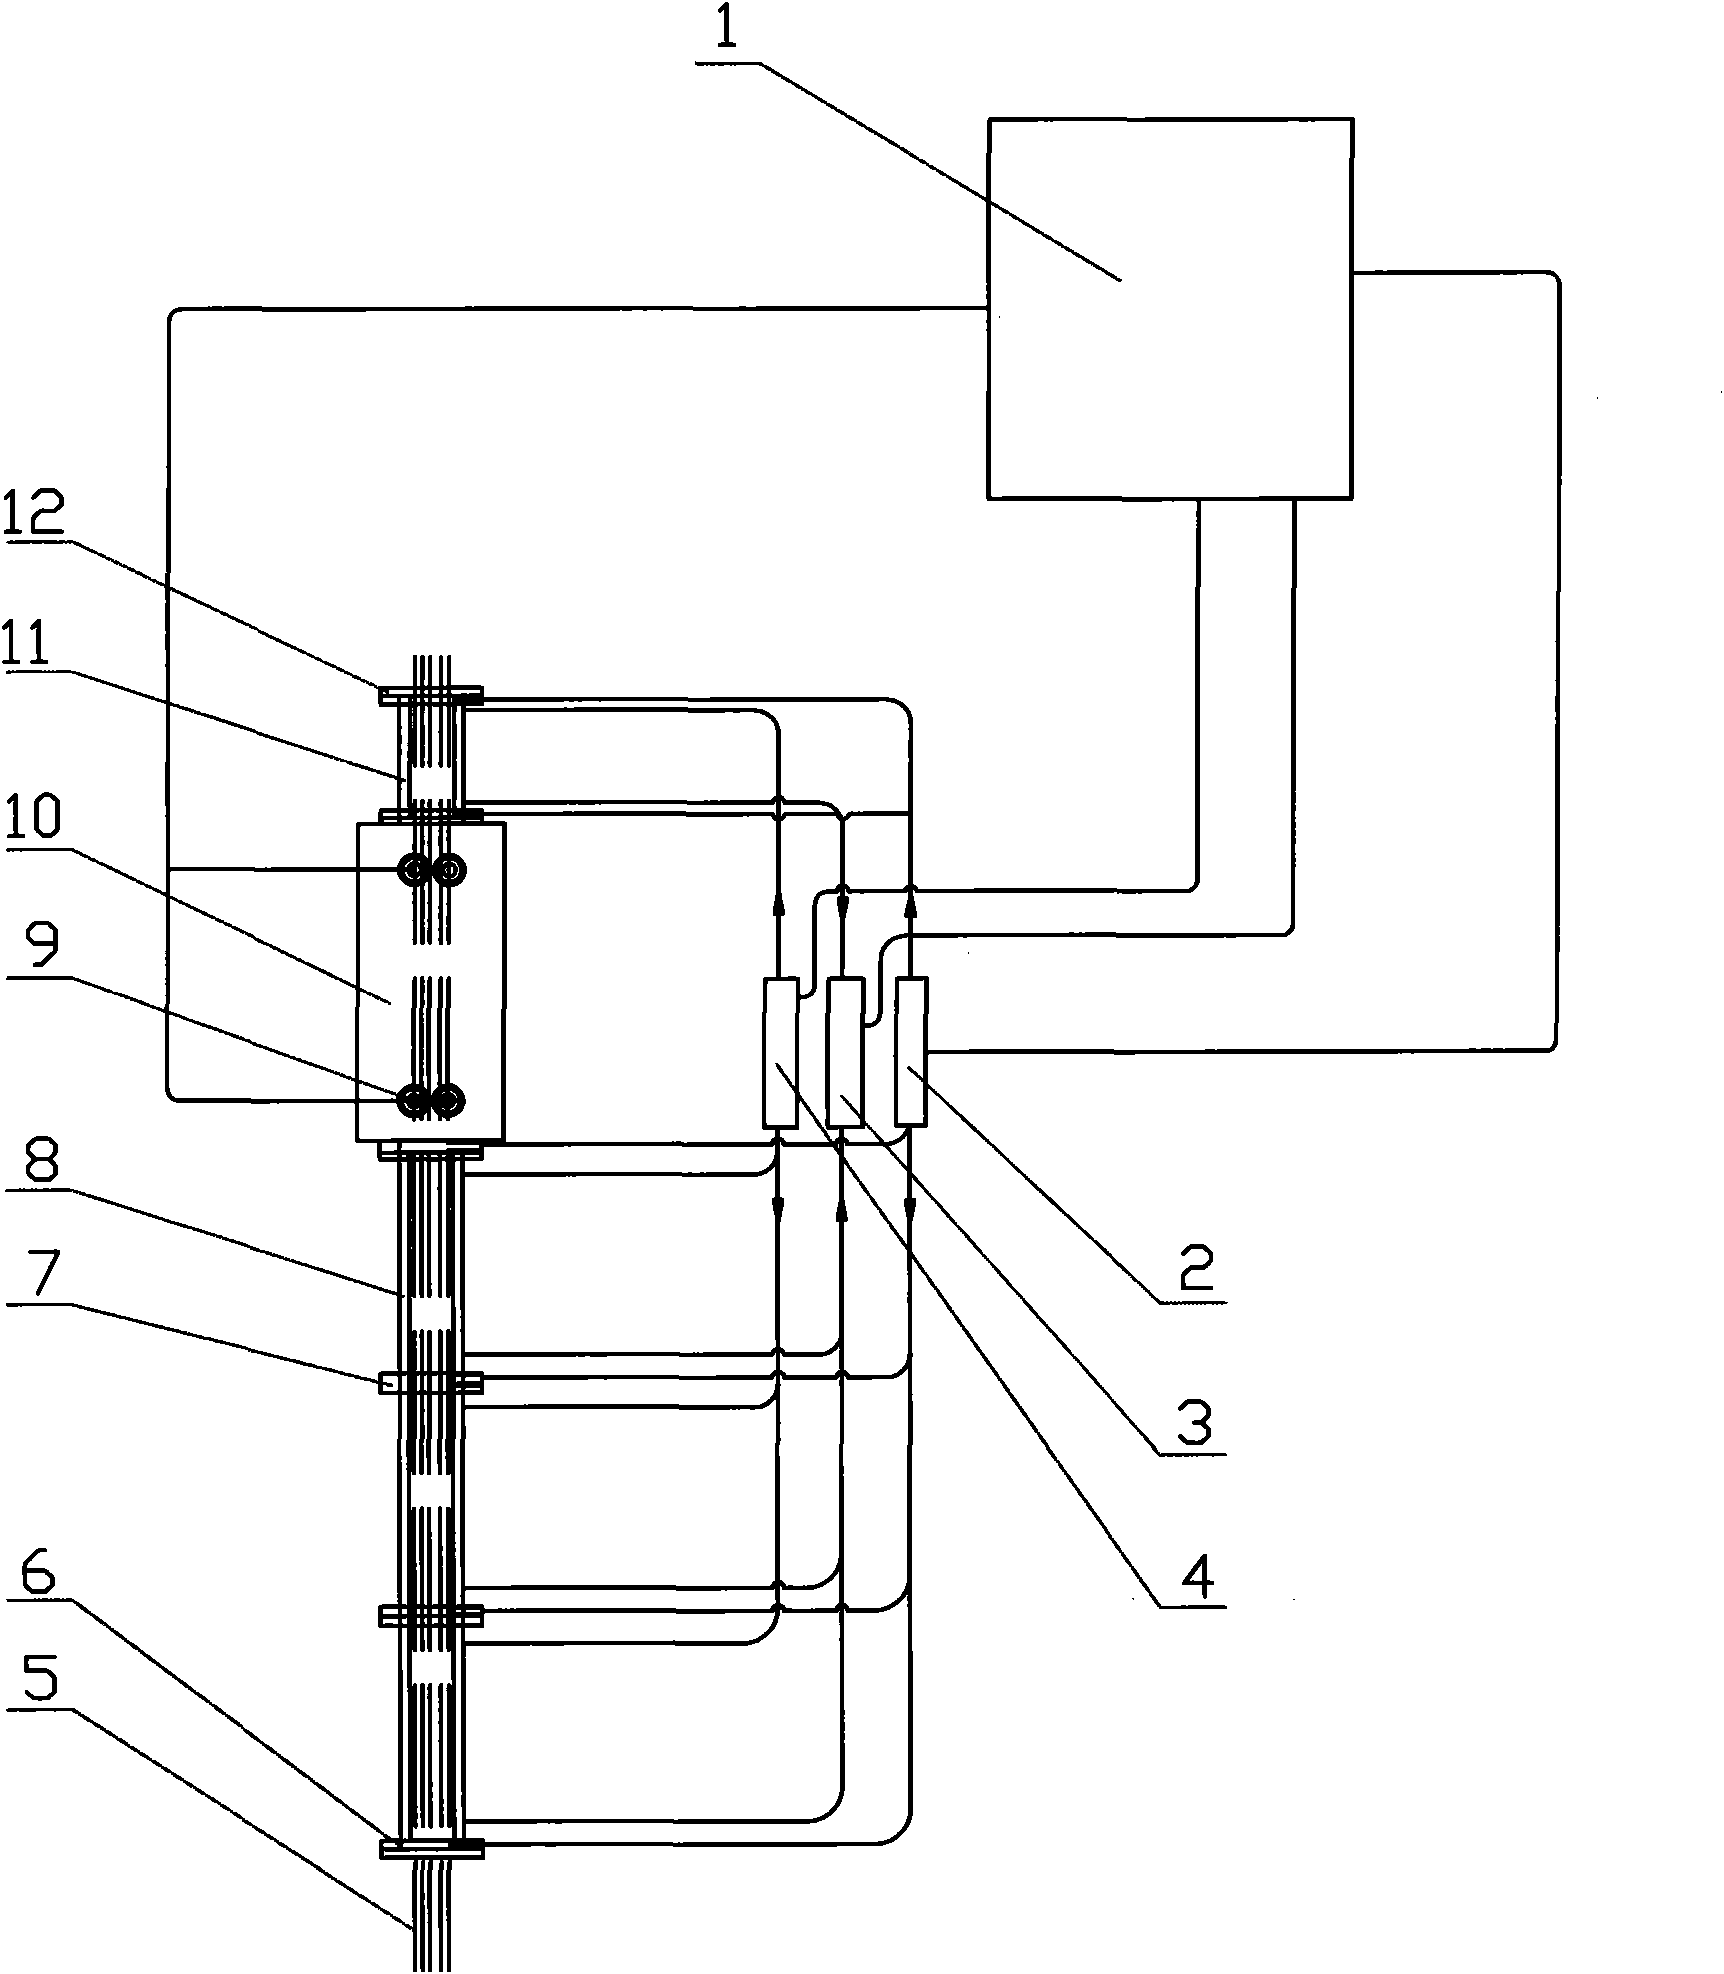 Vertical continuous annealing furnace